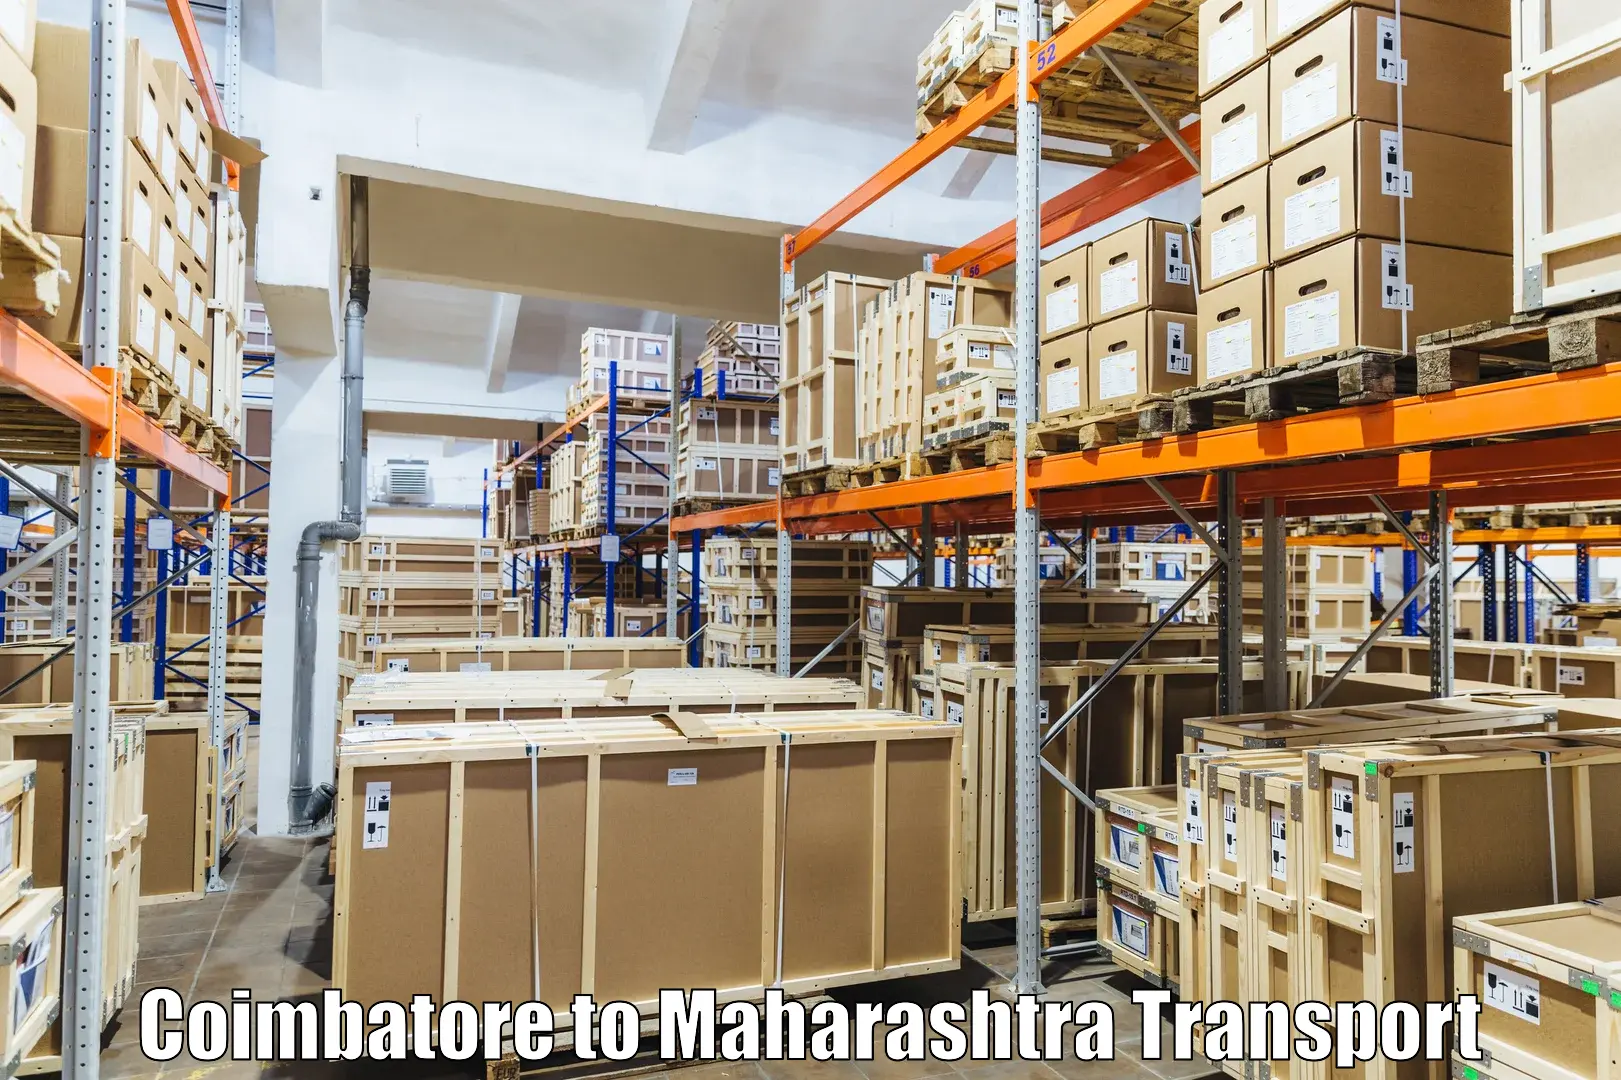 Package delivery services Coimbatore to Pimpri Chinchwad